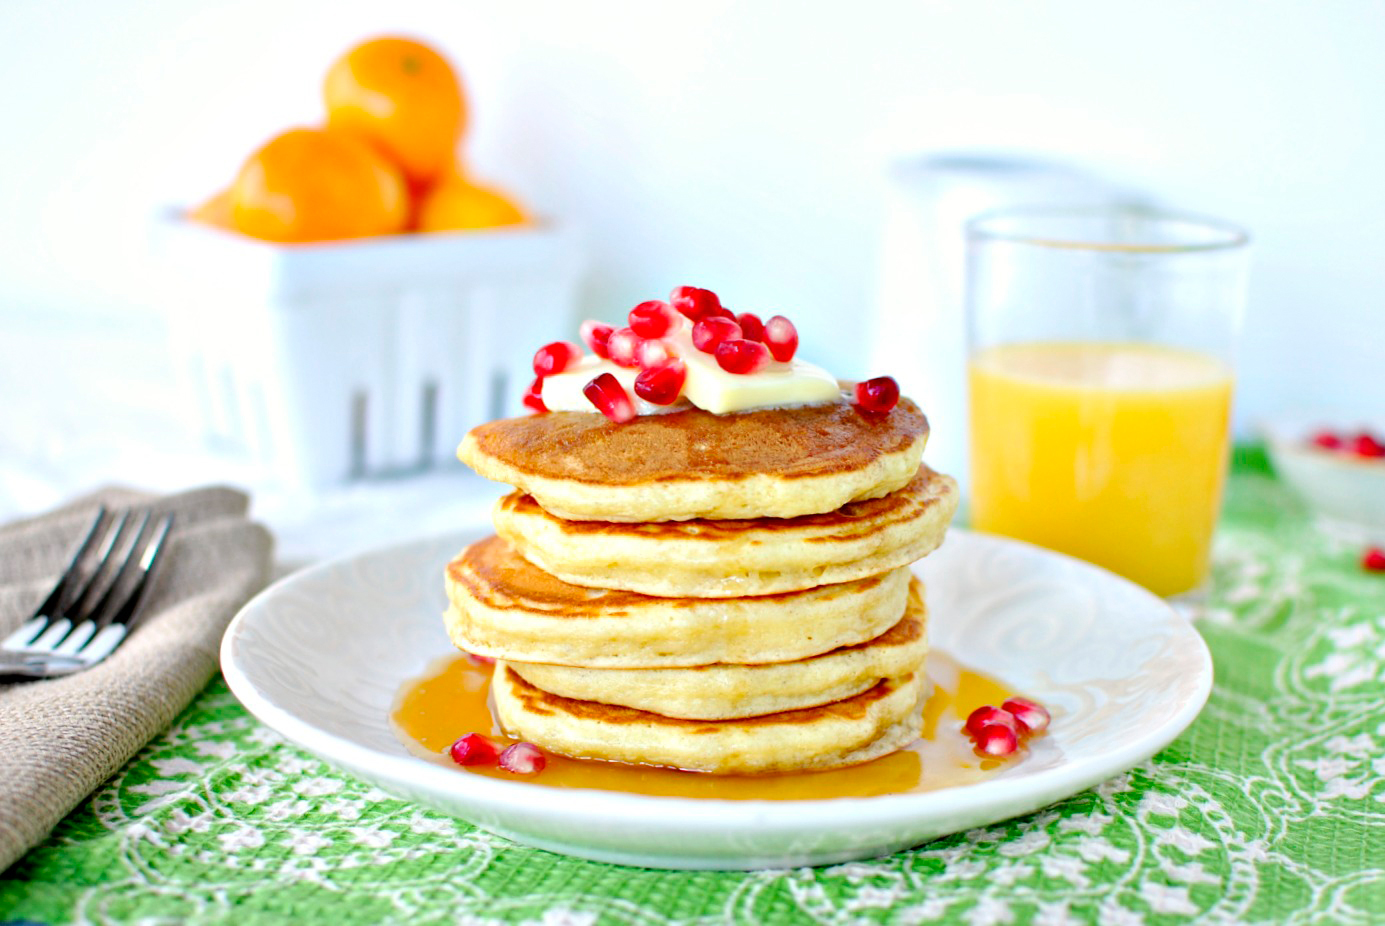 Tasty Kitchen Blog: Eggnog Pancakes. Guest post by Laurie McNamara of Simply Scratch, recipe submitted by TK member Kita of Pass the Sushi.